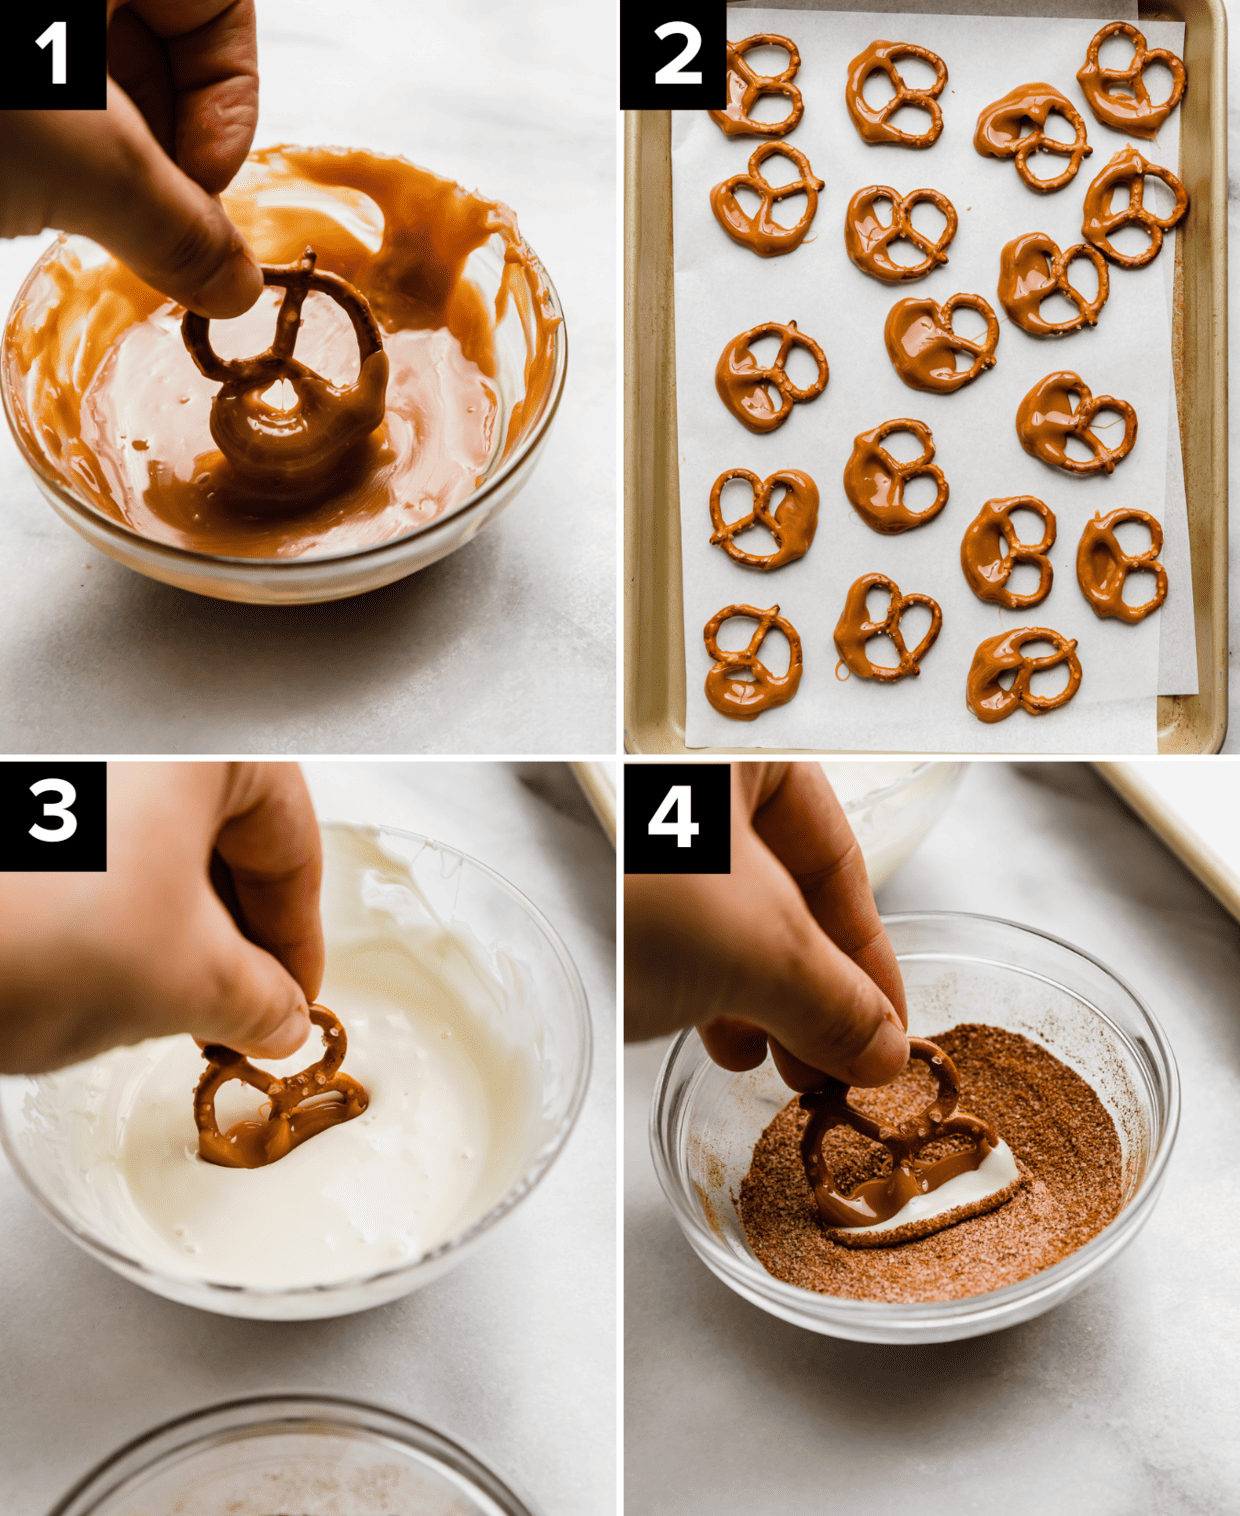 Four photos showing a pretzel dipped in caramel, white chocolate, then cinnamon and sugar.